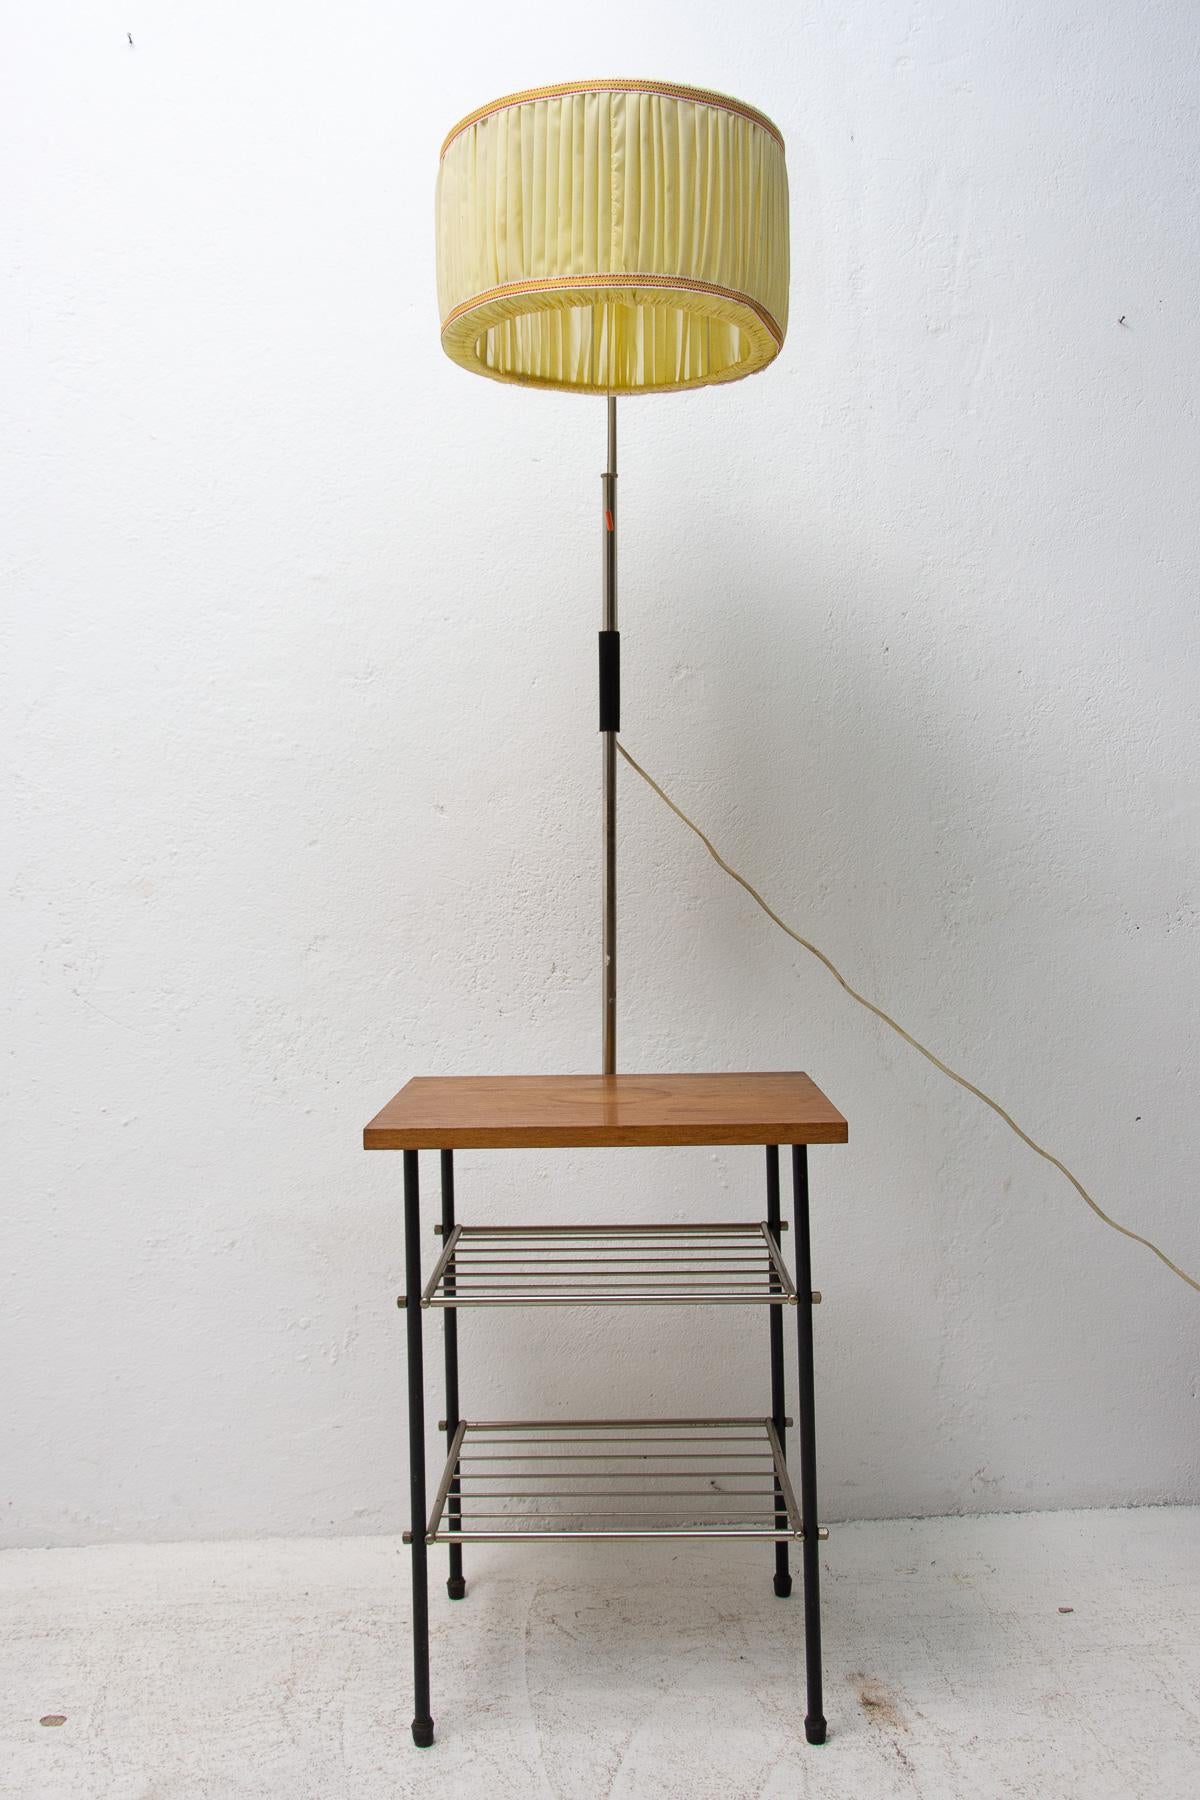 Mid-Century Modern Vintage Floor Lamp with Storage Space, 70s, Czechoslovakia For Sale